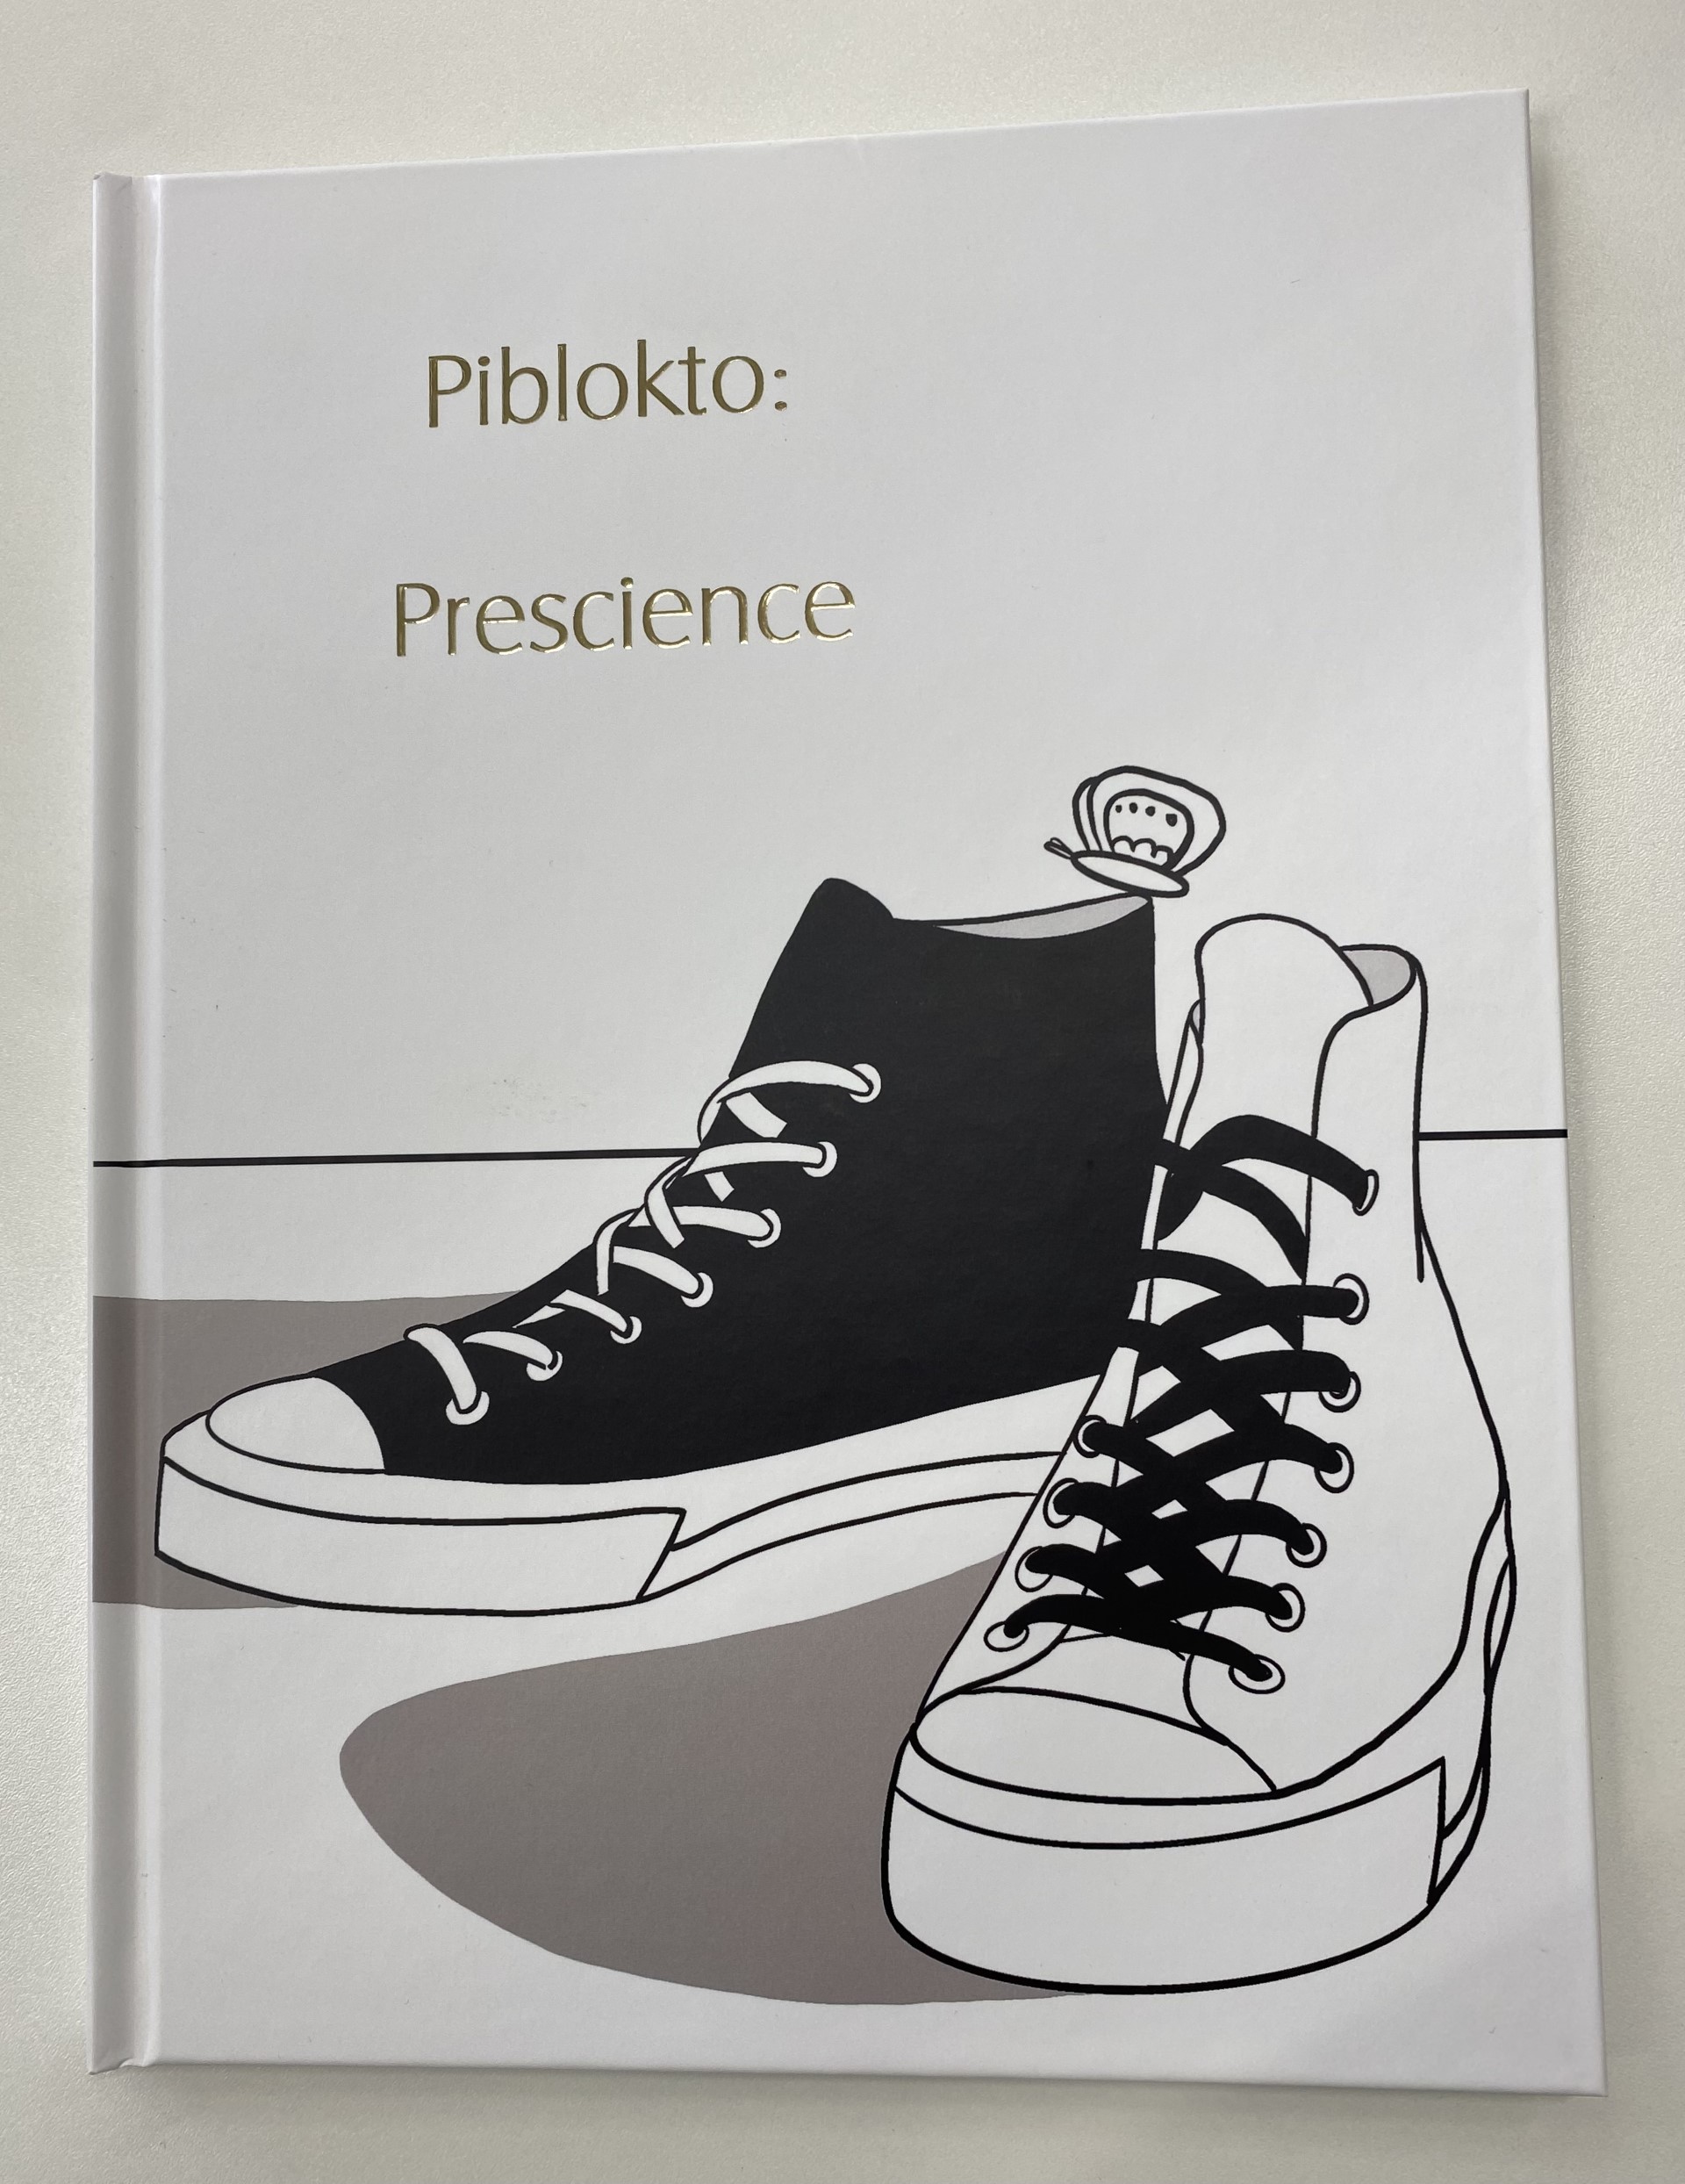 A picture of the cover of a Graphic Novel by Pui Ki Tse. The cover has two shoes, one black and one white, reminiscent of Converse shoes over a white background with a dark coloured text on the top left corner "Piblokto: Prescience".